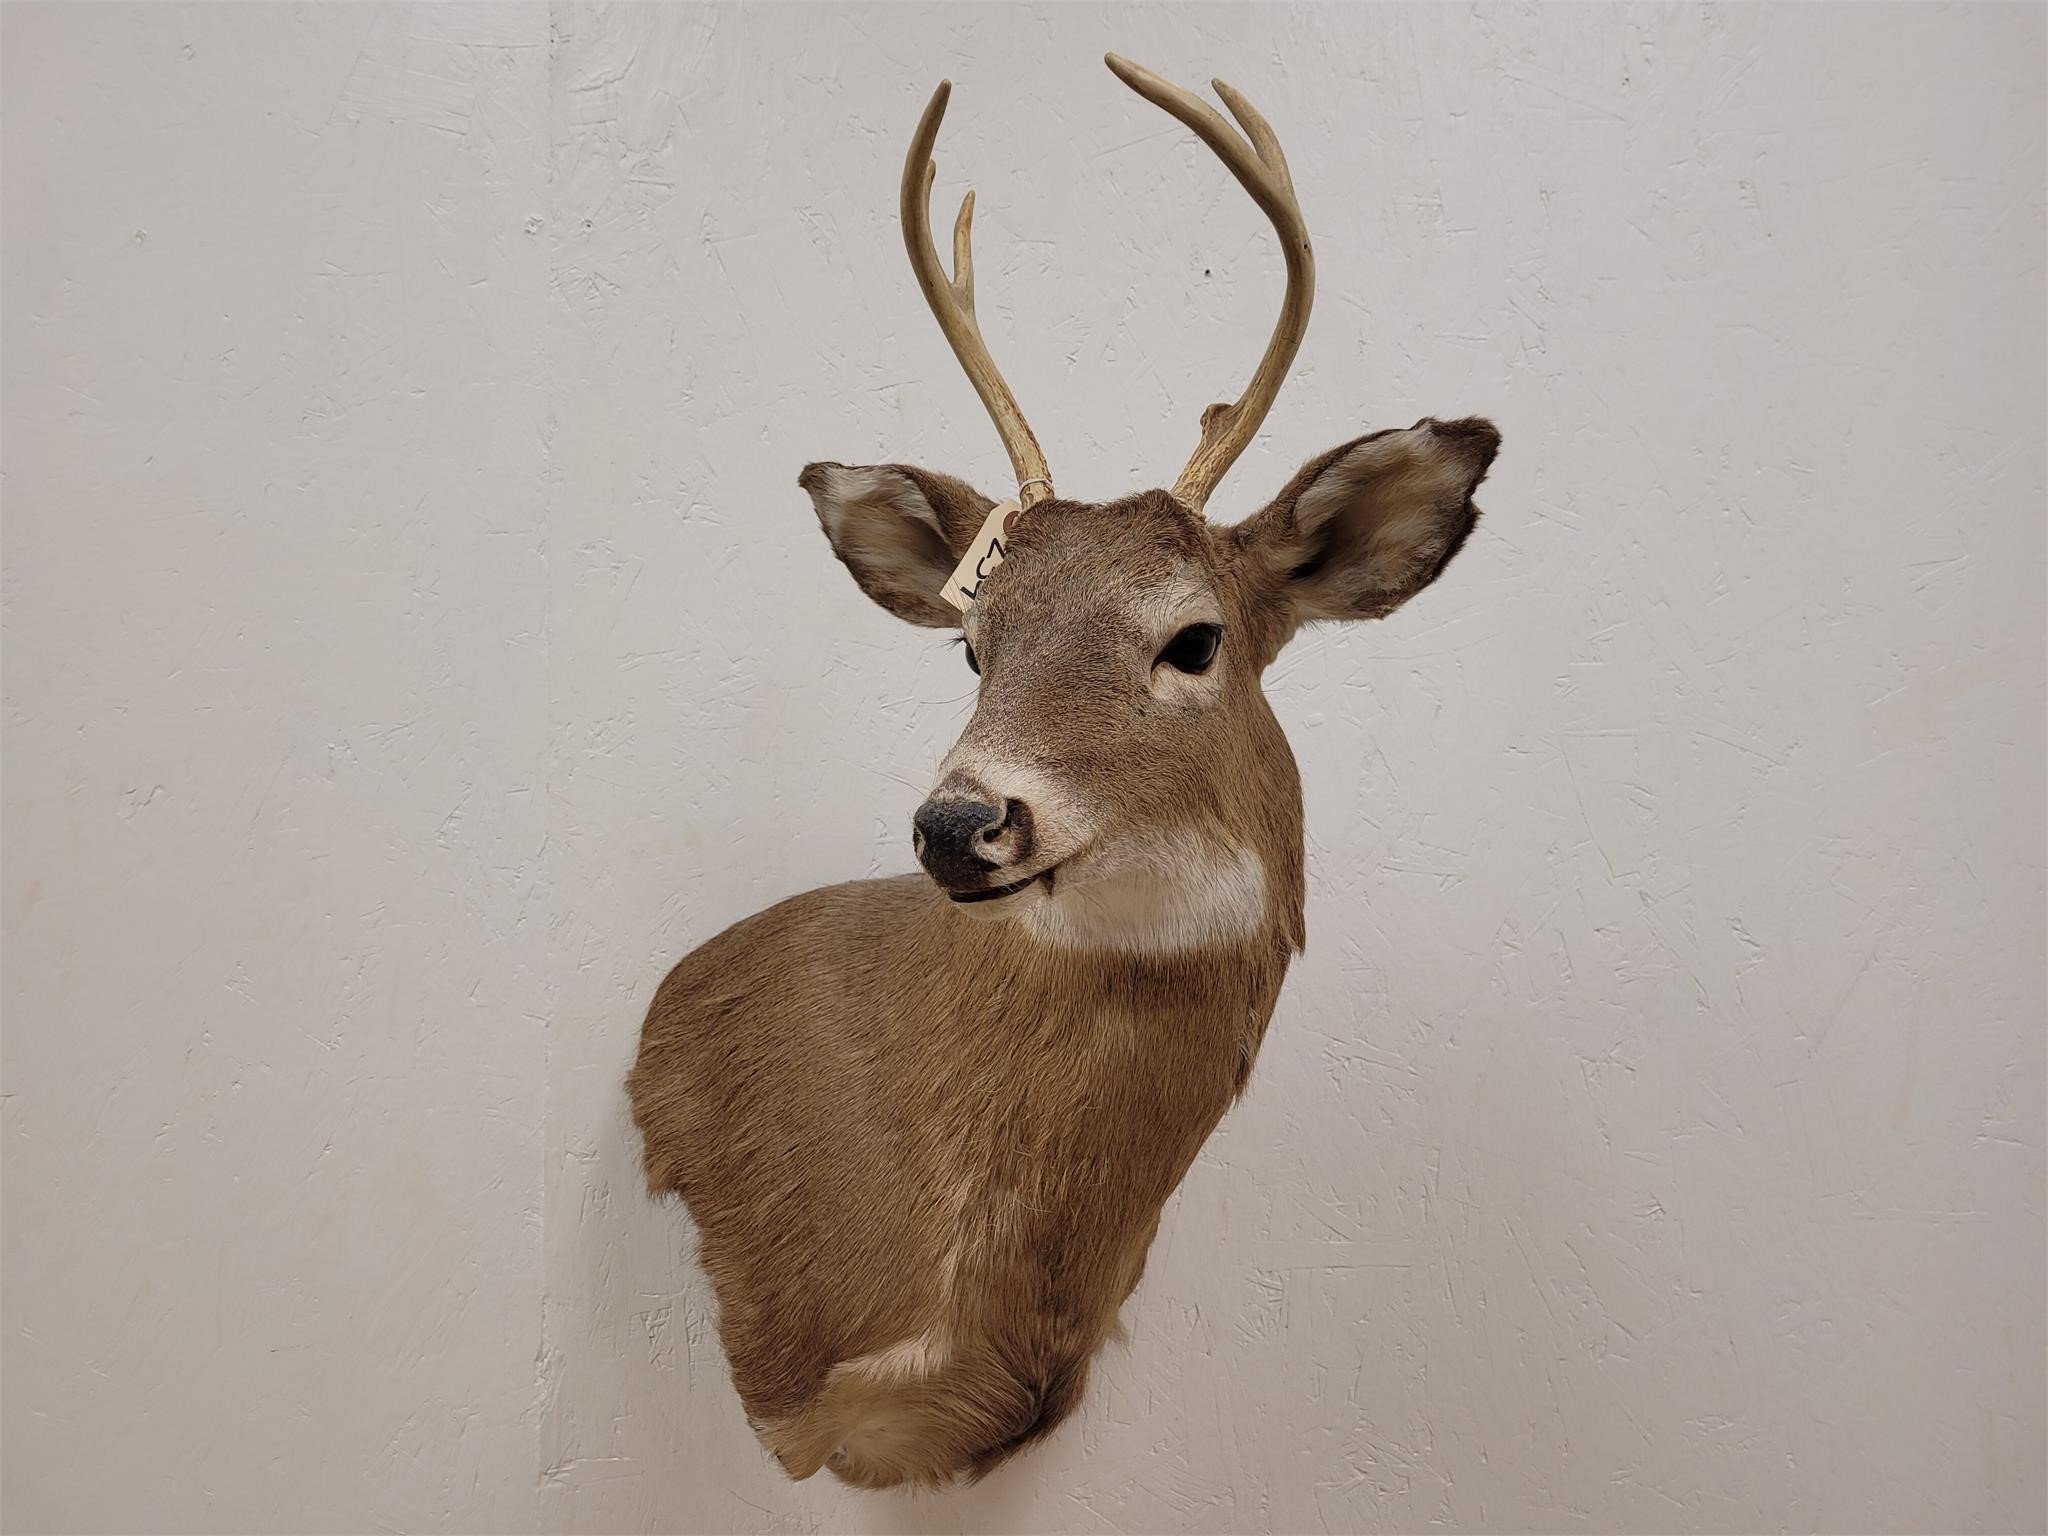 4/24/2021 Taxidermy Auction